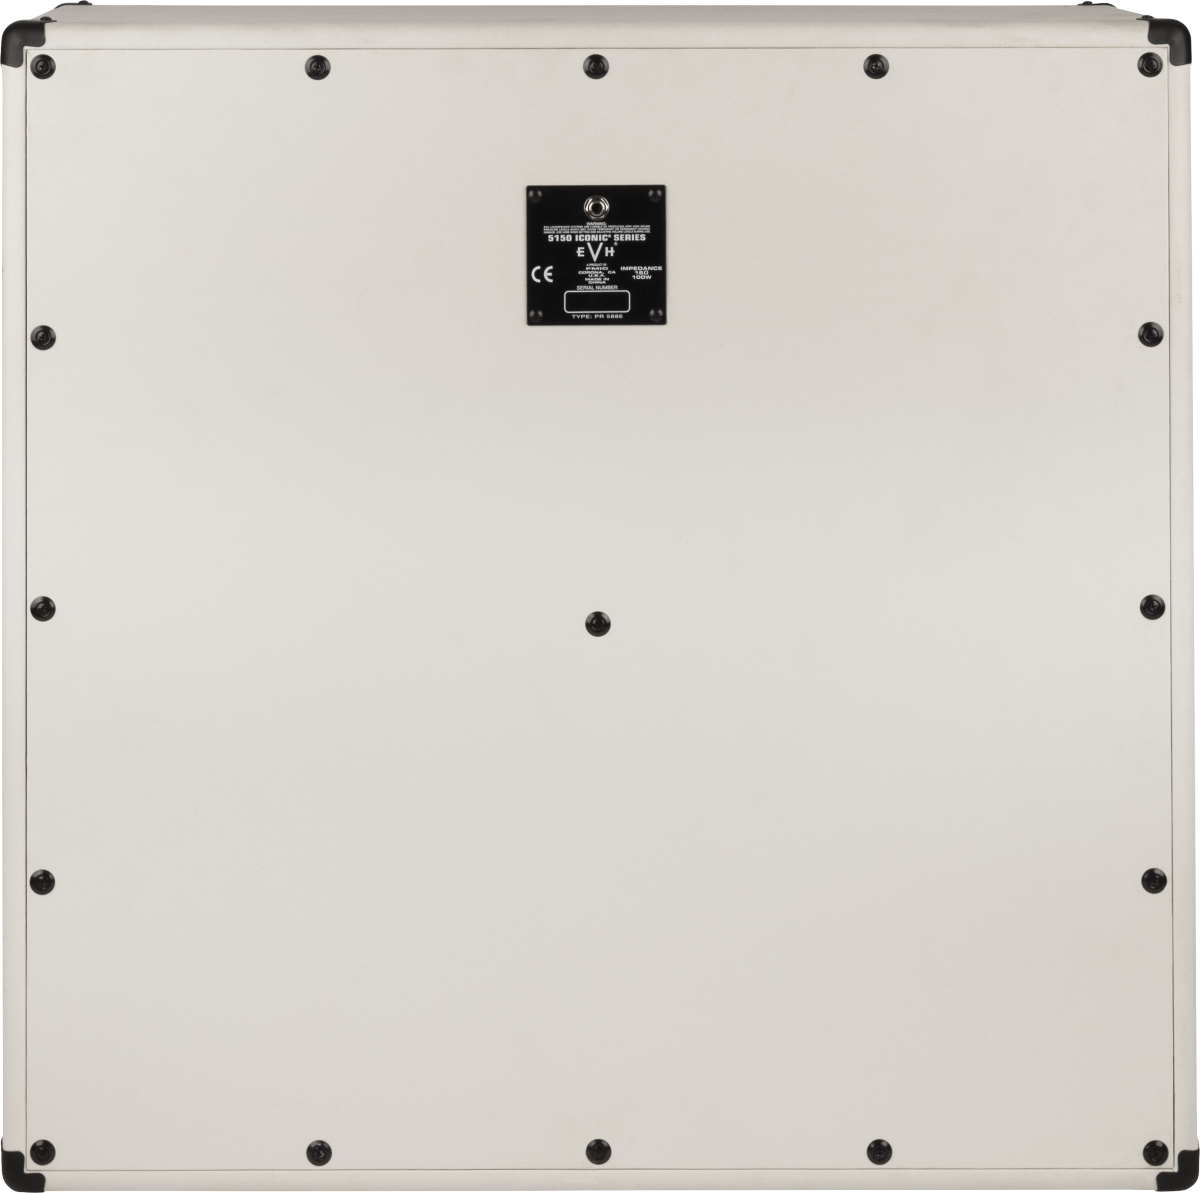 EVH 5150 Iconic Series 4X12 Cabinet Ivory ギター用スピーカーキャビネット